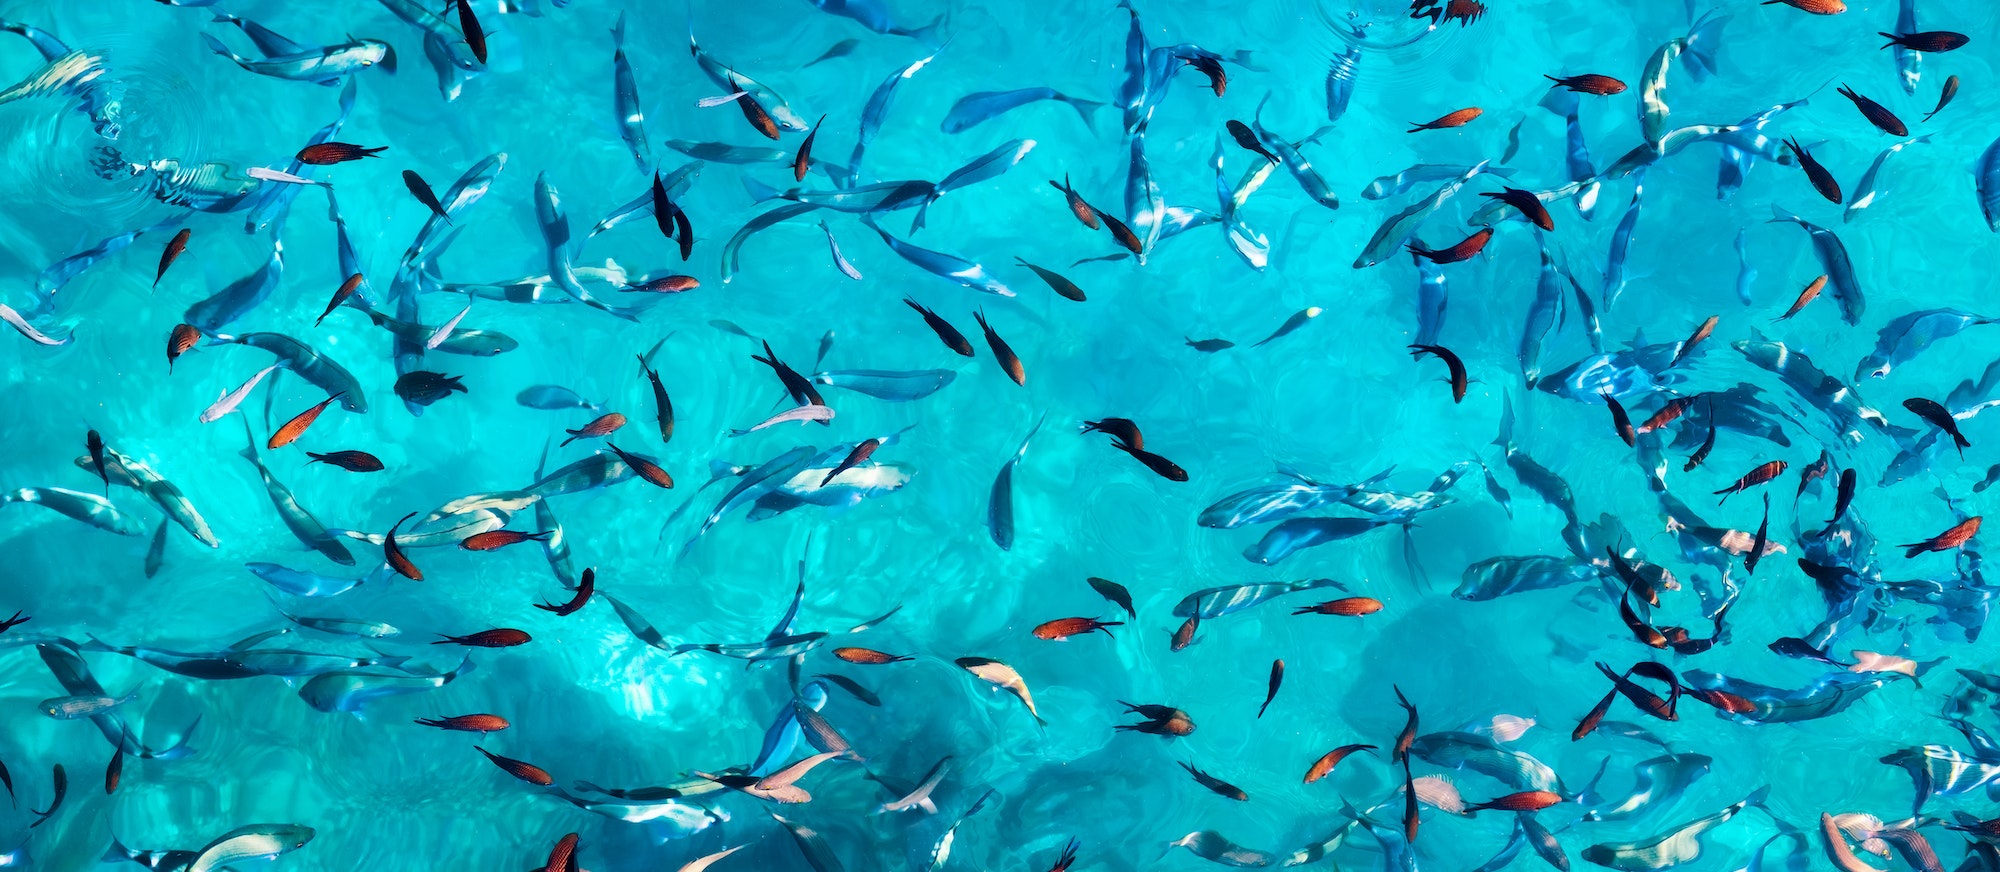 Fishes in the transparent blue water. Natural background with animals